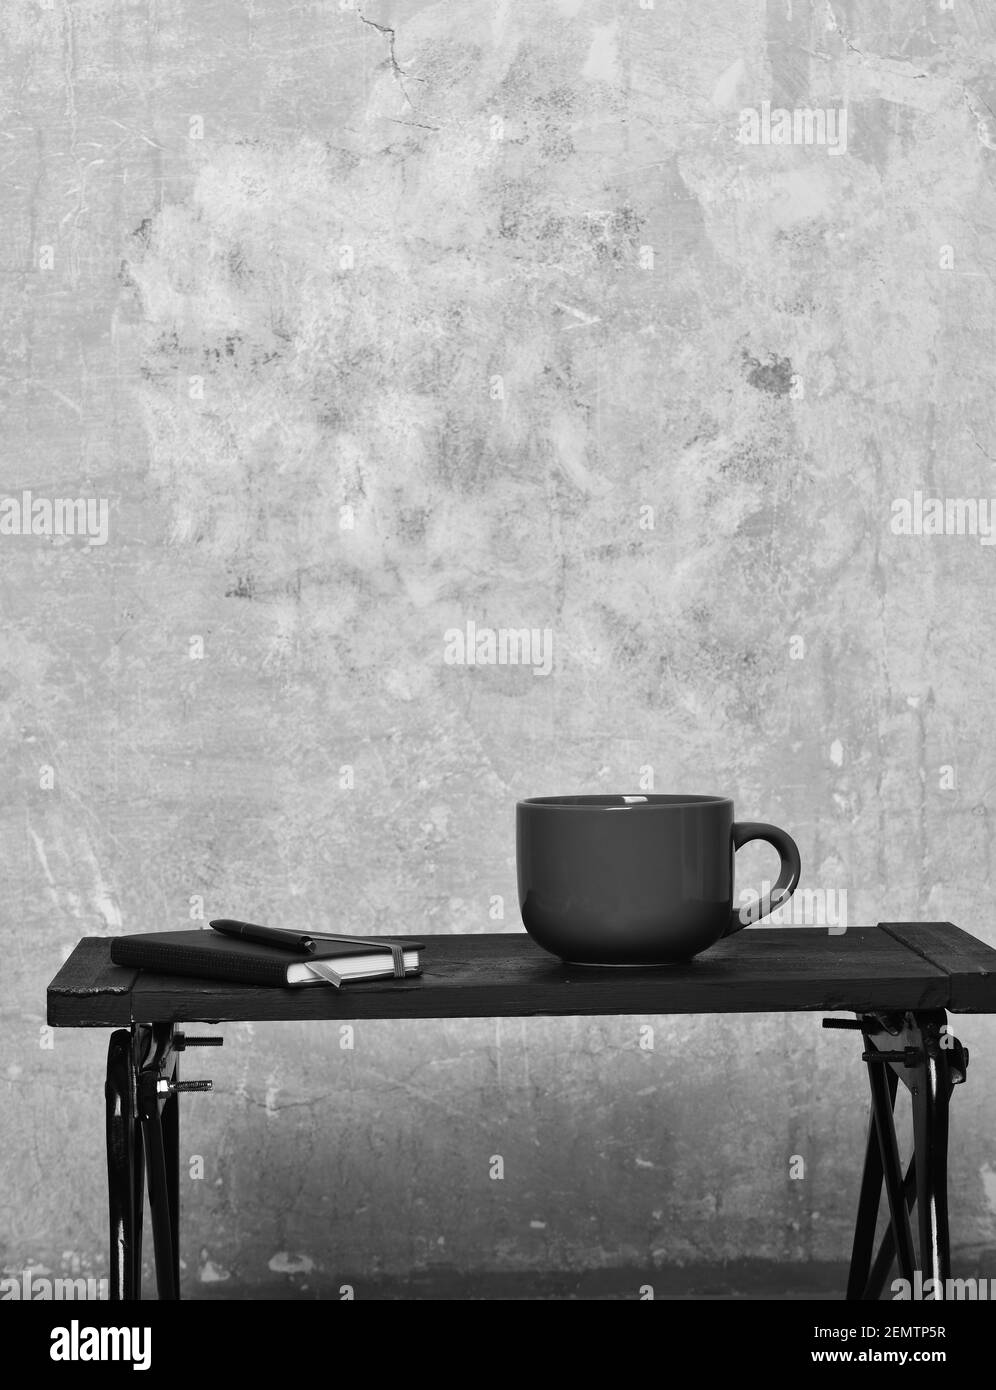 red tea or coffee cup or ceramic mug for drink copybook and pen black tray on beige textured background, copy space Stock Photo